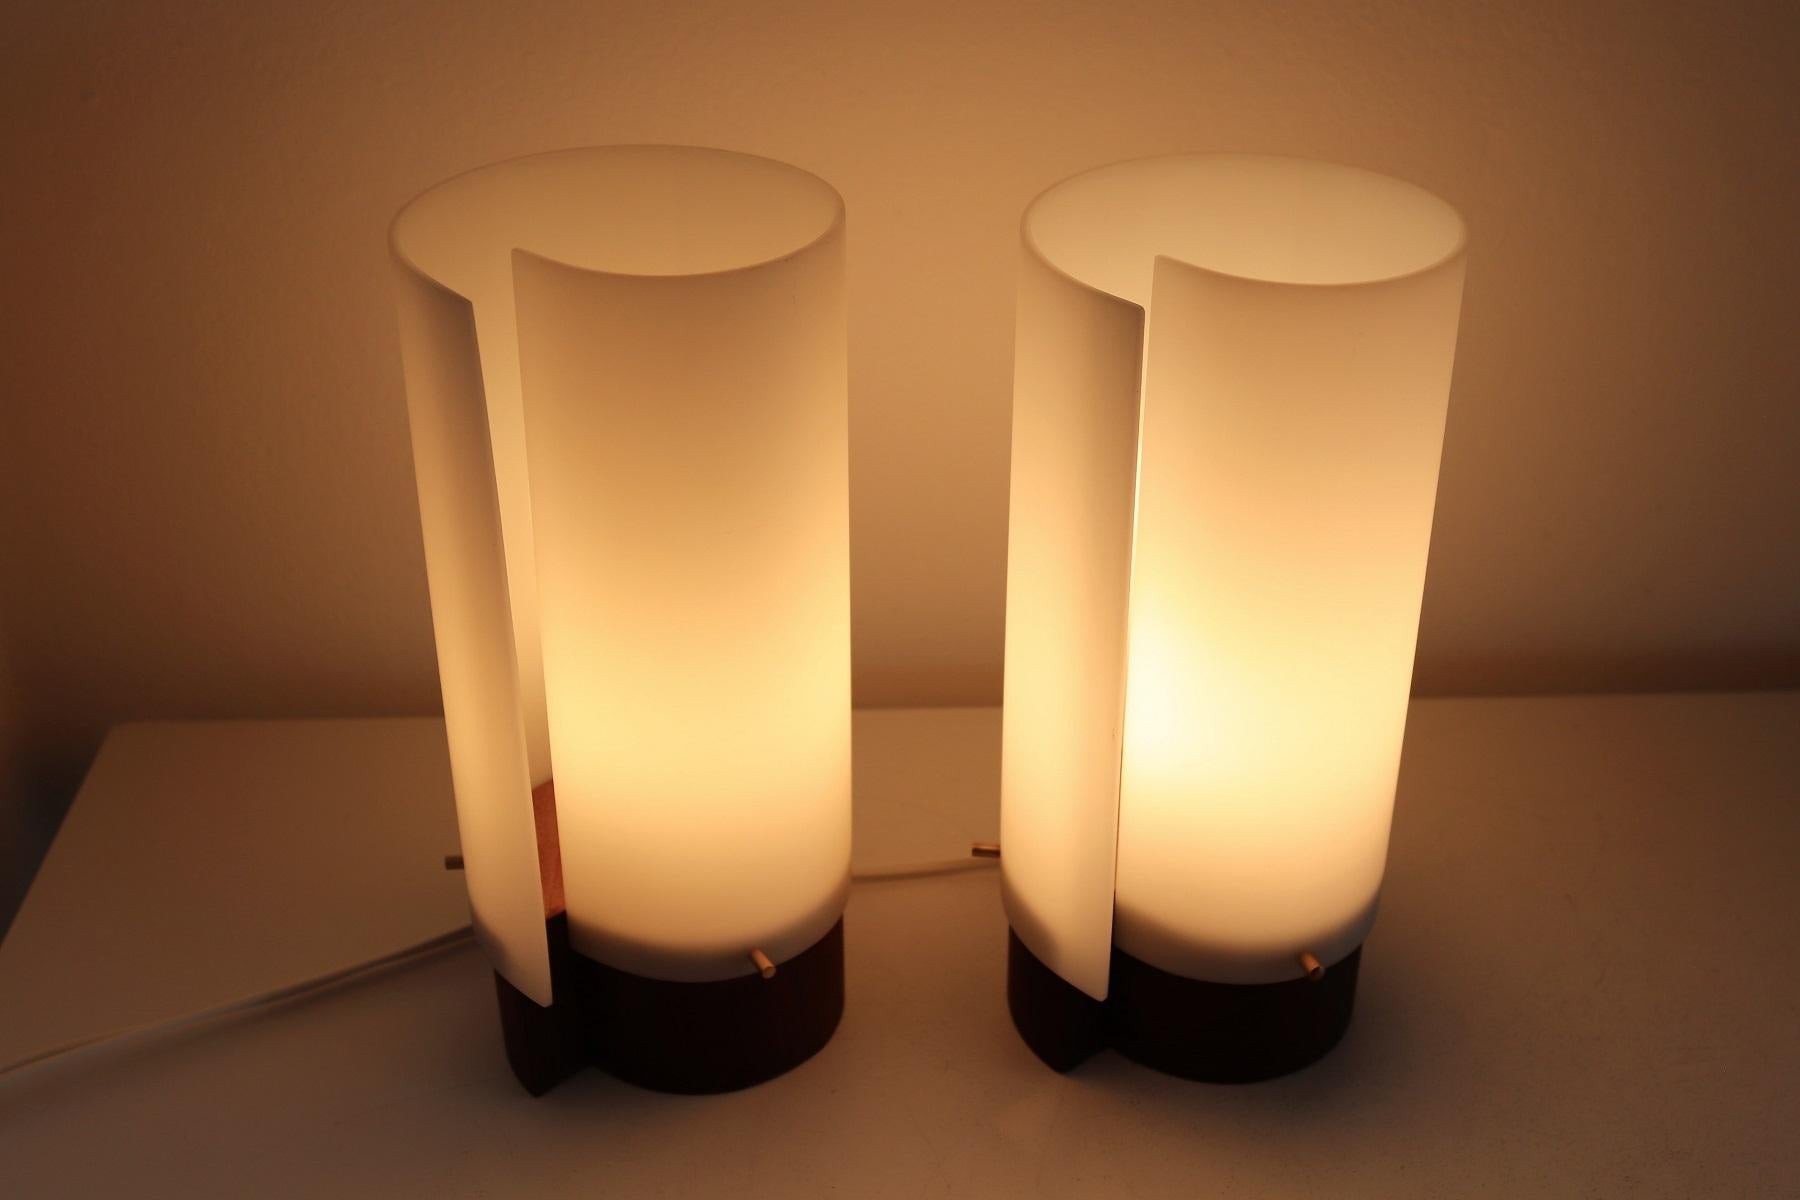 Acrylic Italian Modernist Teakwood Table Lamps with Methacrylic Curved Shades, 1950s For Sale